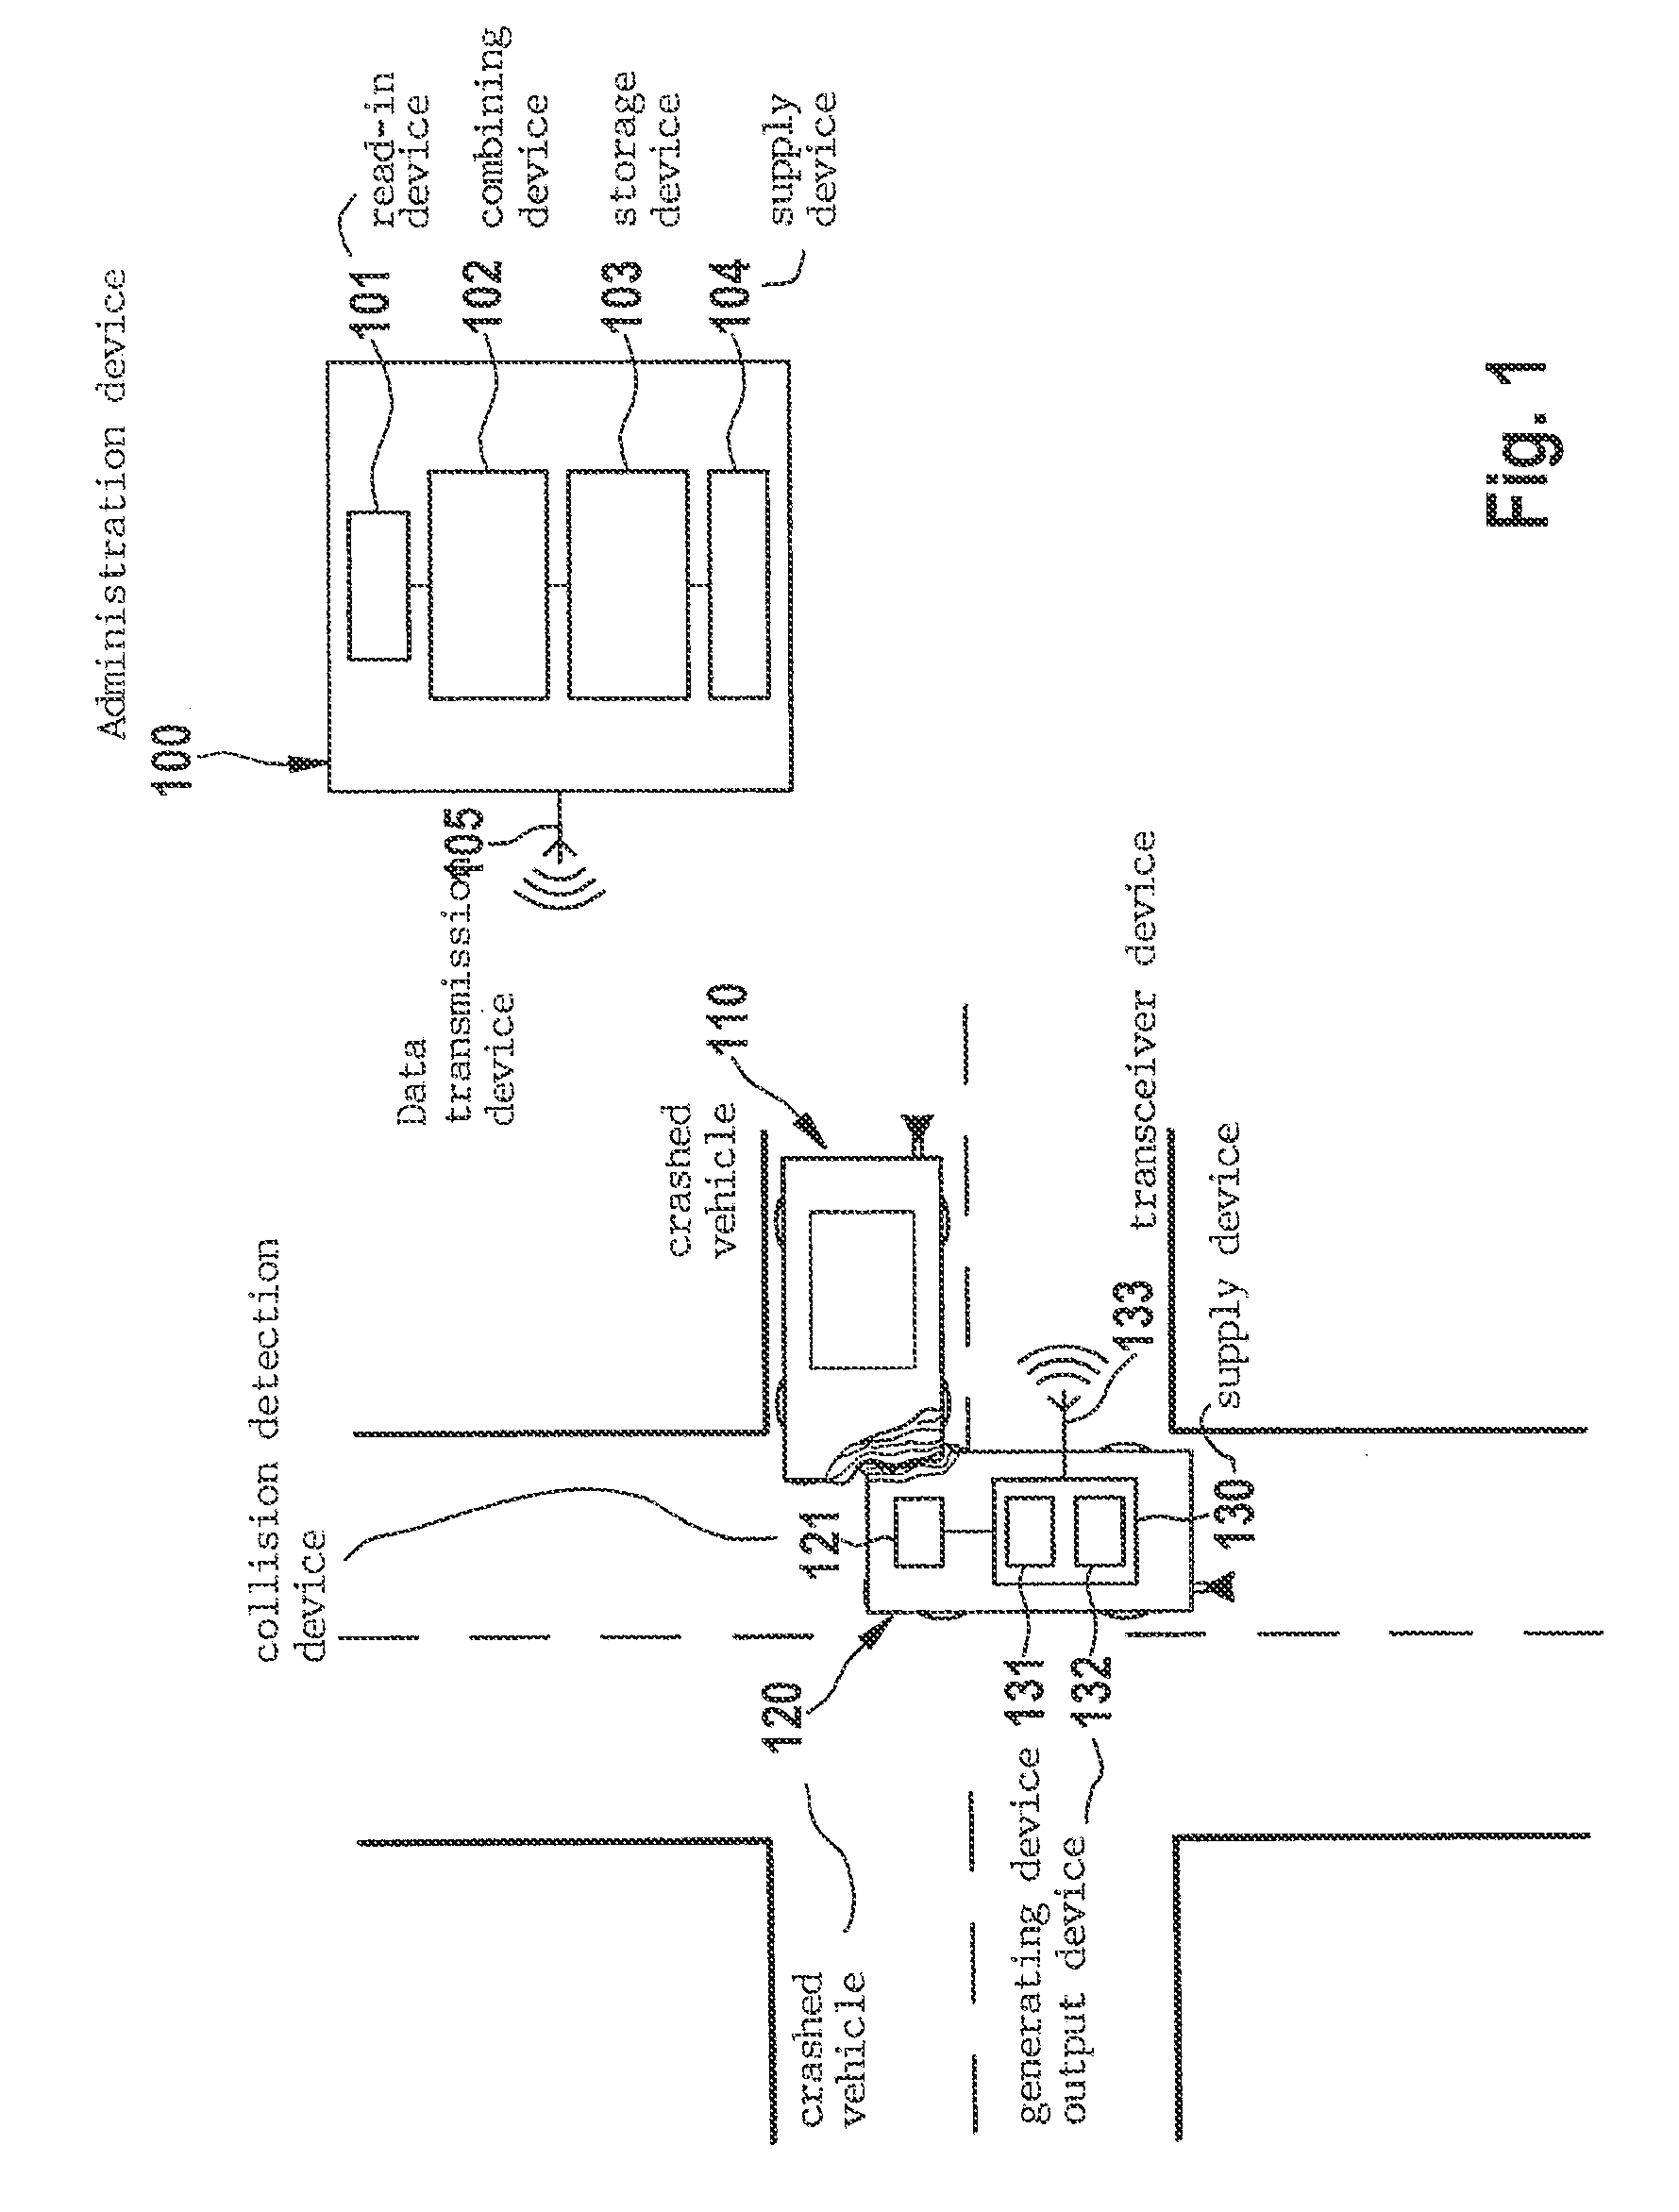 Method and device for supplying a collision signal pertaining to a vehicle collision, a method and device for administering collision data pertaining to vehicle collisions, as well as a method and device for controlling at least one collision protection device of a vehicle